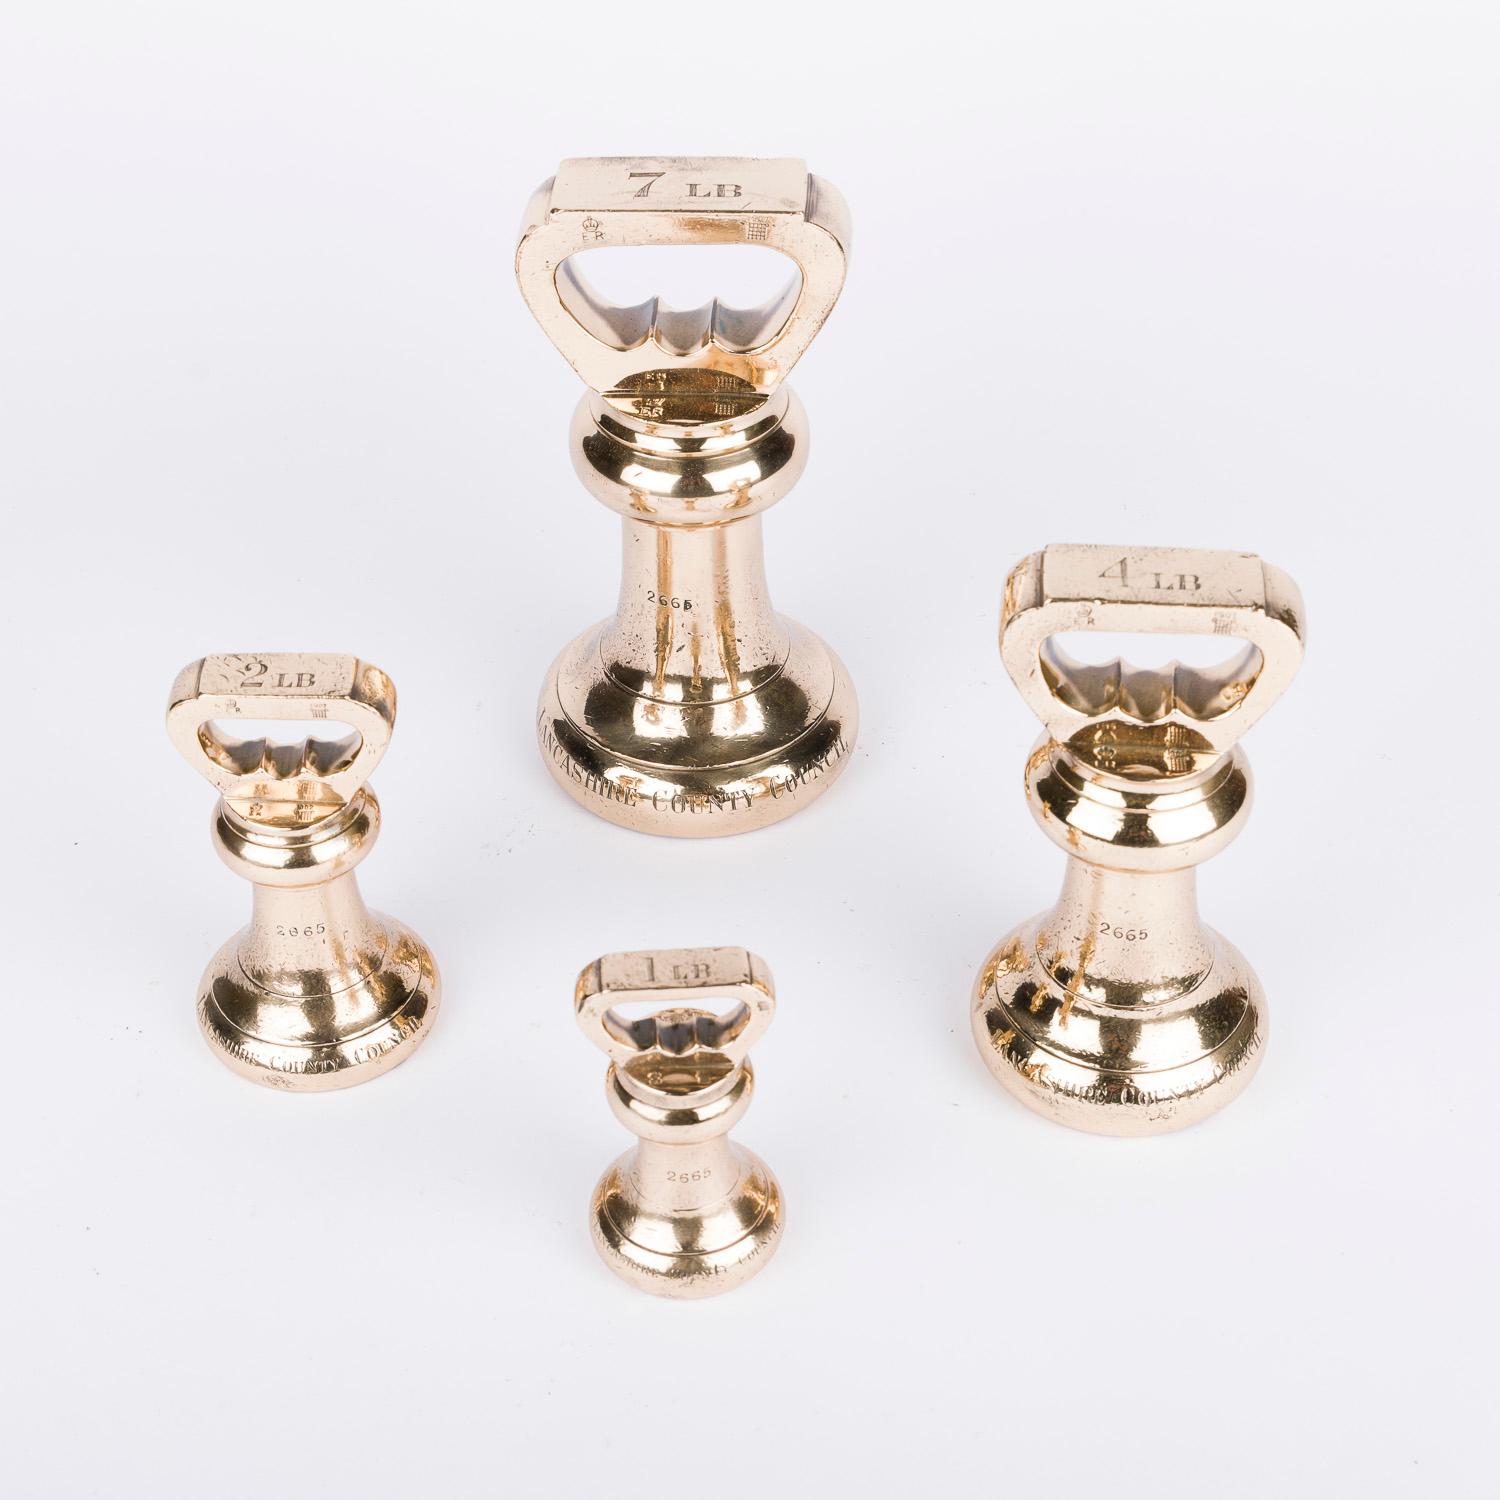 A set of bronze imperial standard bell weights by De Grave & Co of London, circa 1900.

4 bell weights: 7, 4, 2 and 1 lbs.

With a case of smaller ounce and dram disc weights. (8, 4, 2, 1, & ½ Ounce, and 4, 2, 1 & ½ Dram).

Indenture number: